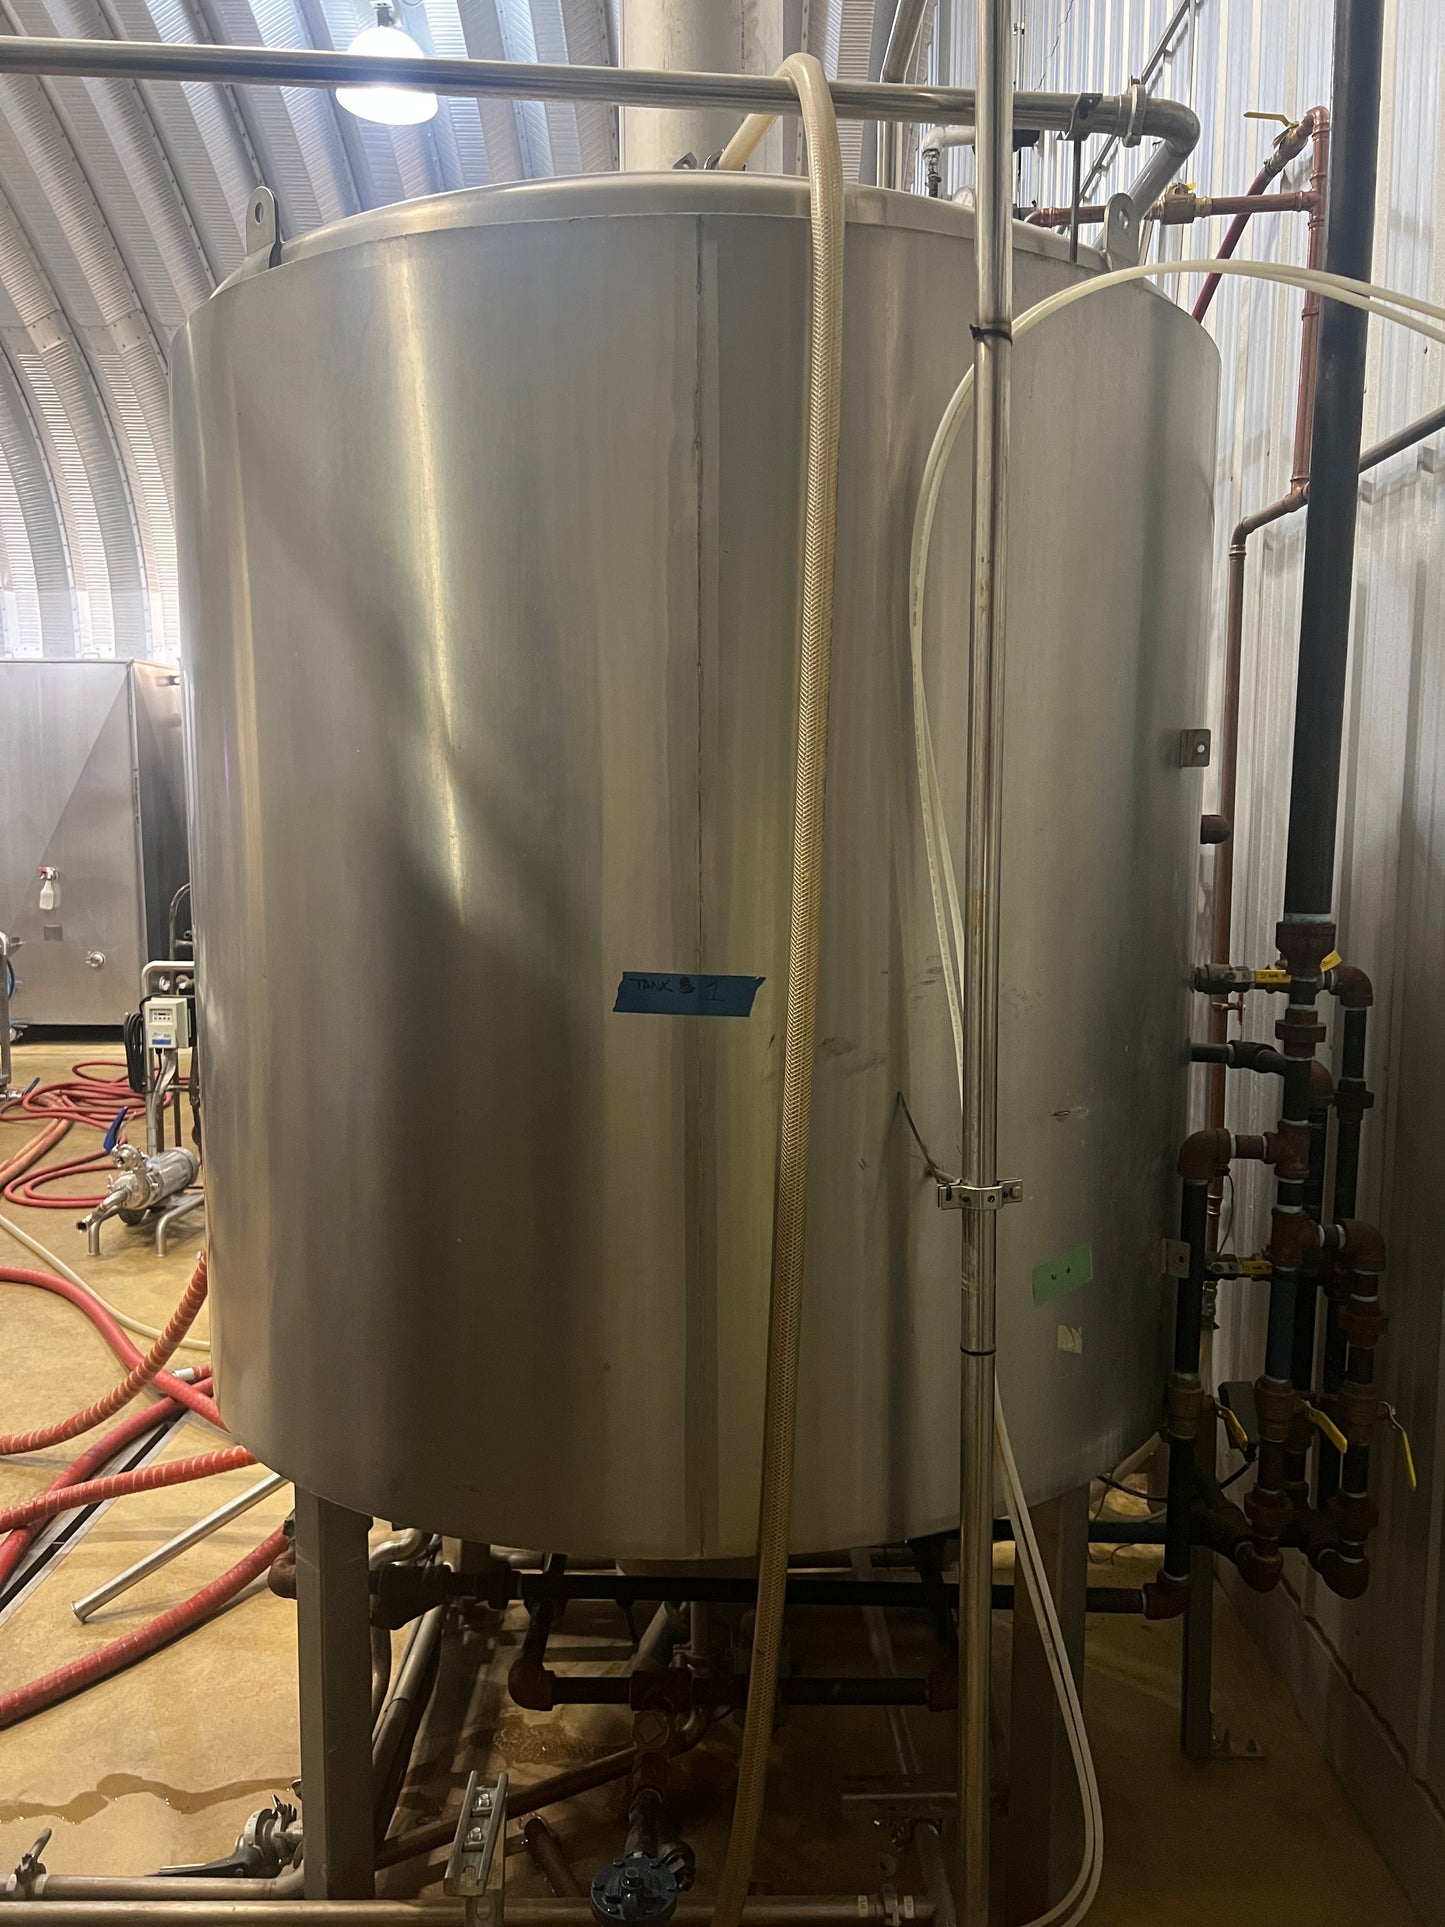 DME 15bbl 4-vessel Brewhouse - SPECIAL OFFER! Great for a starting brewery.